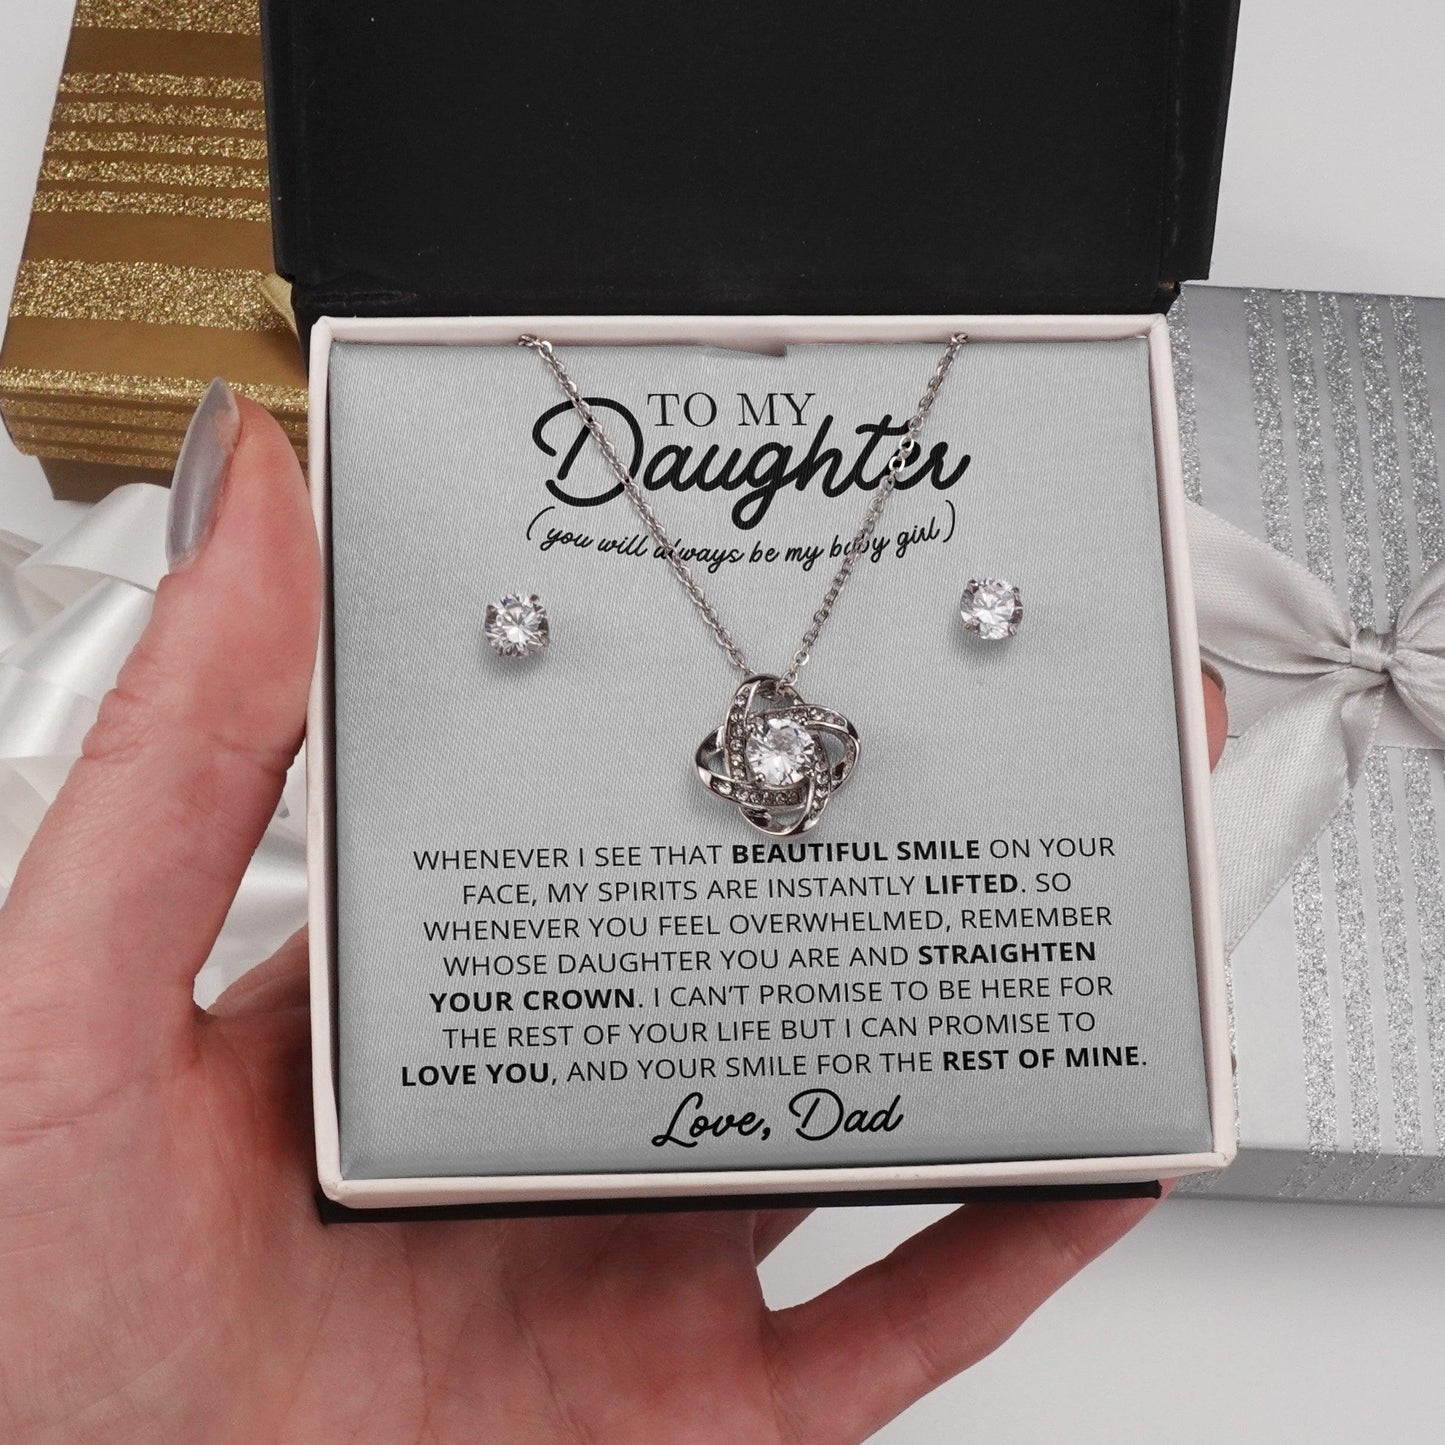 Jewelry gifts Daughter - Promise - LK Gift Set - Belesmé - Memorable Jewelry Gifts 